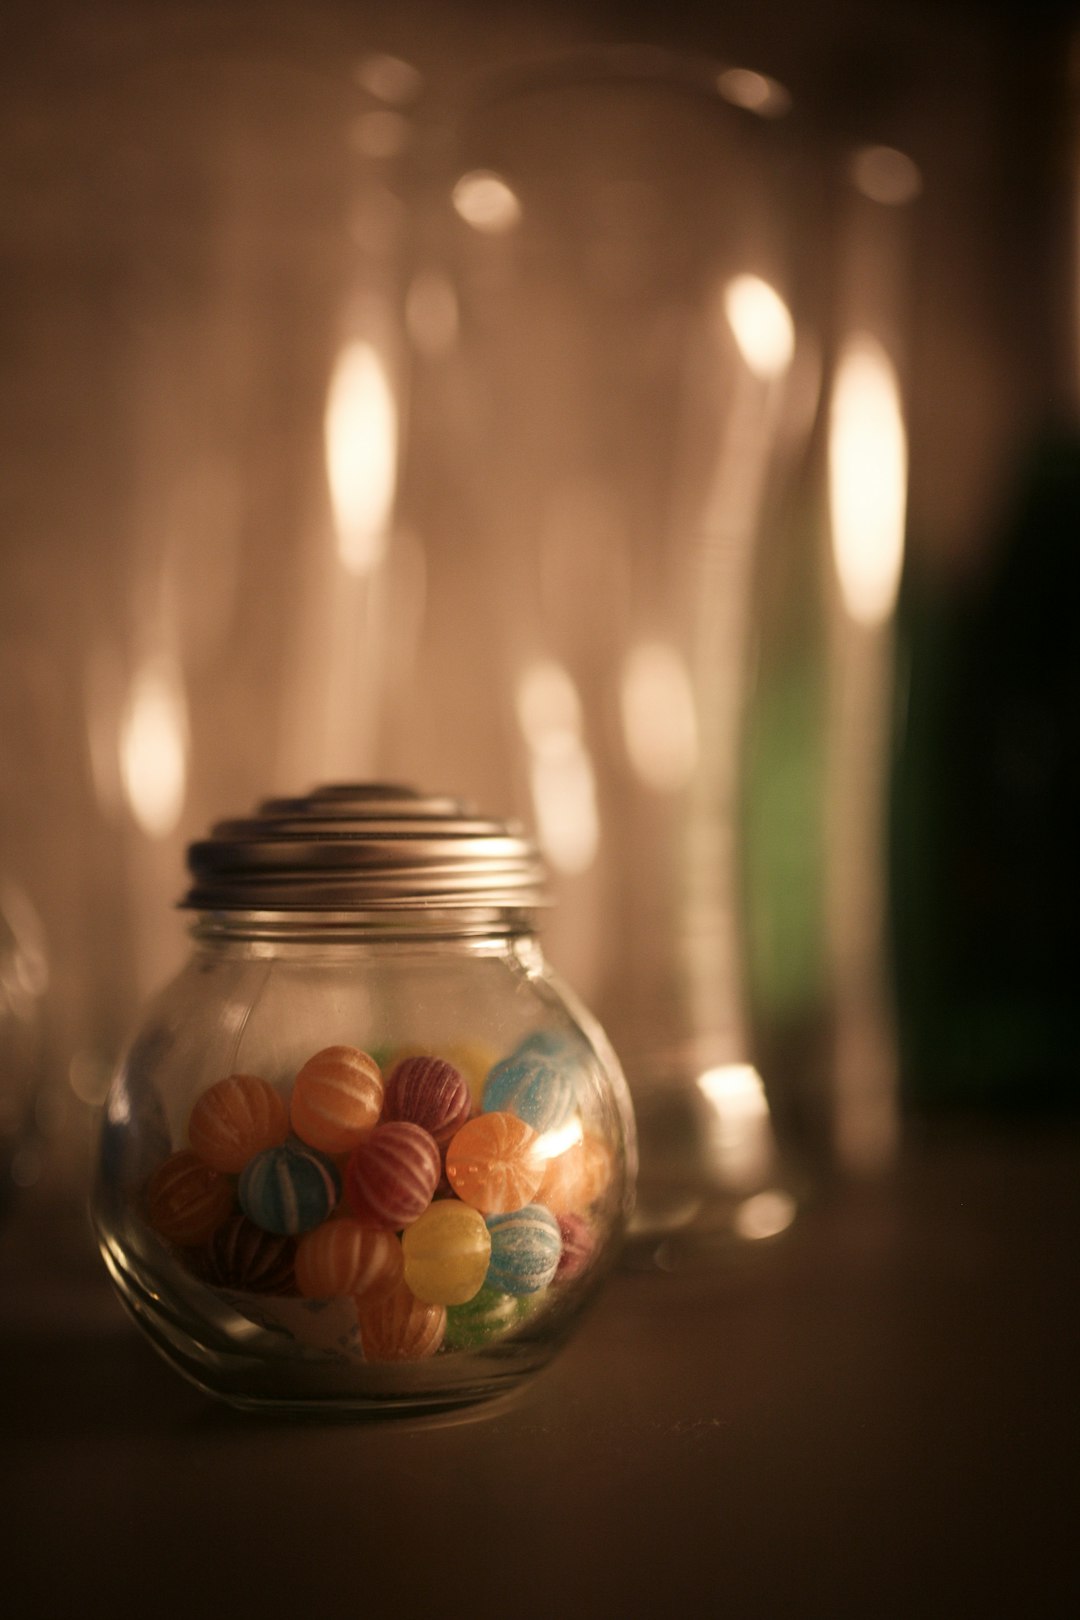 clear glass jar with candies inside